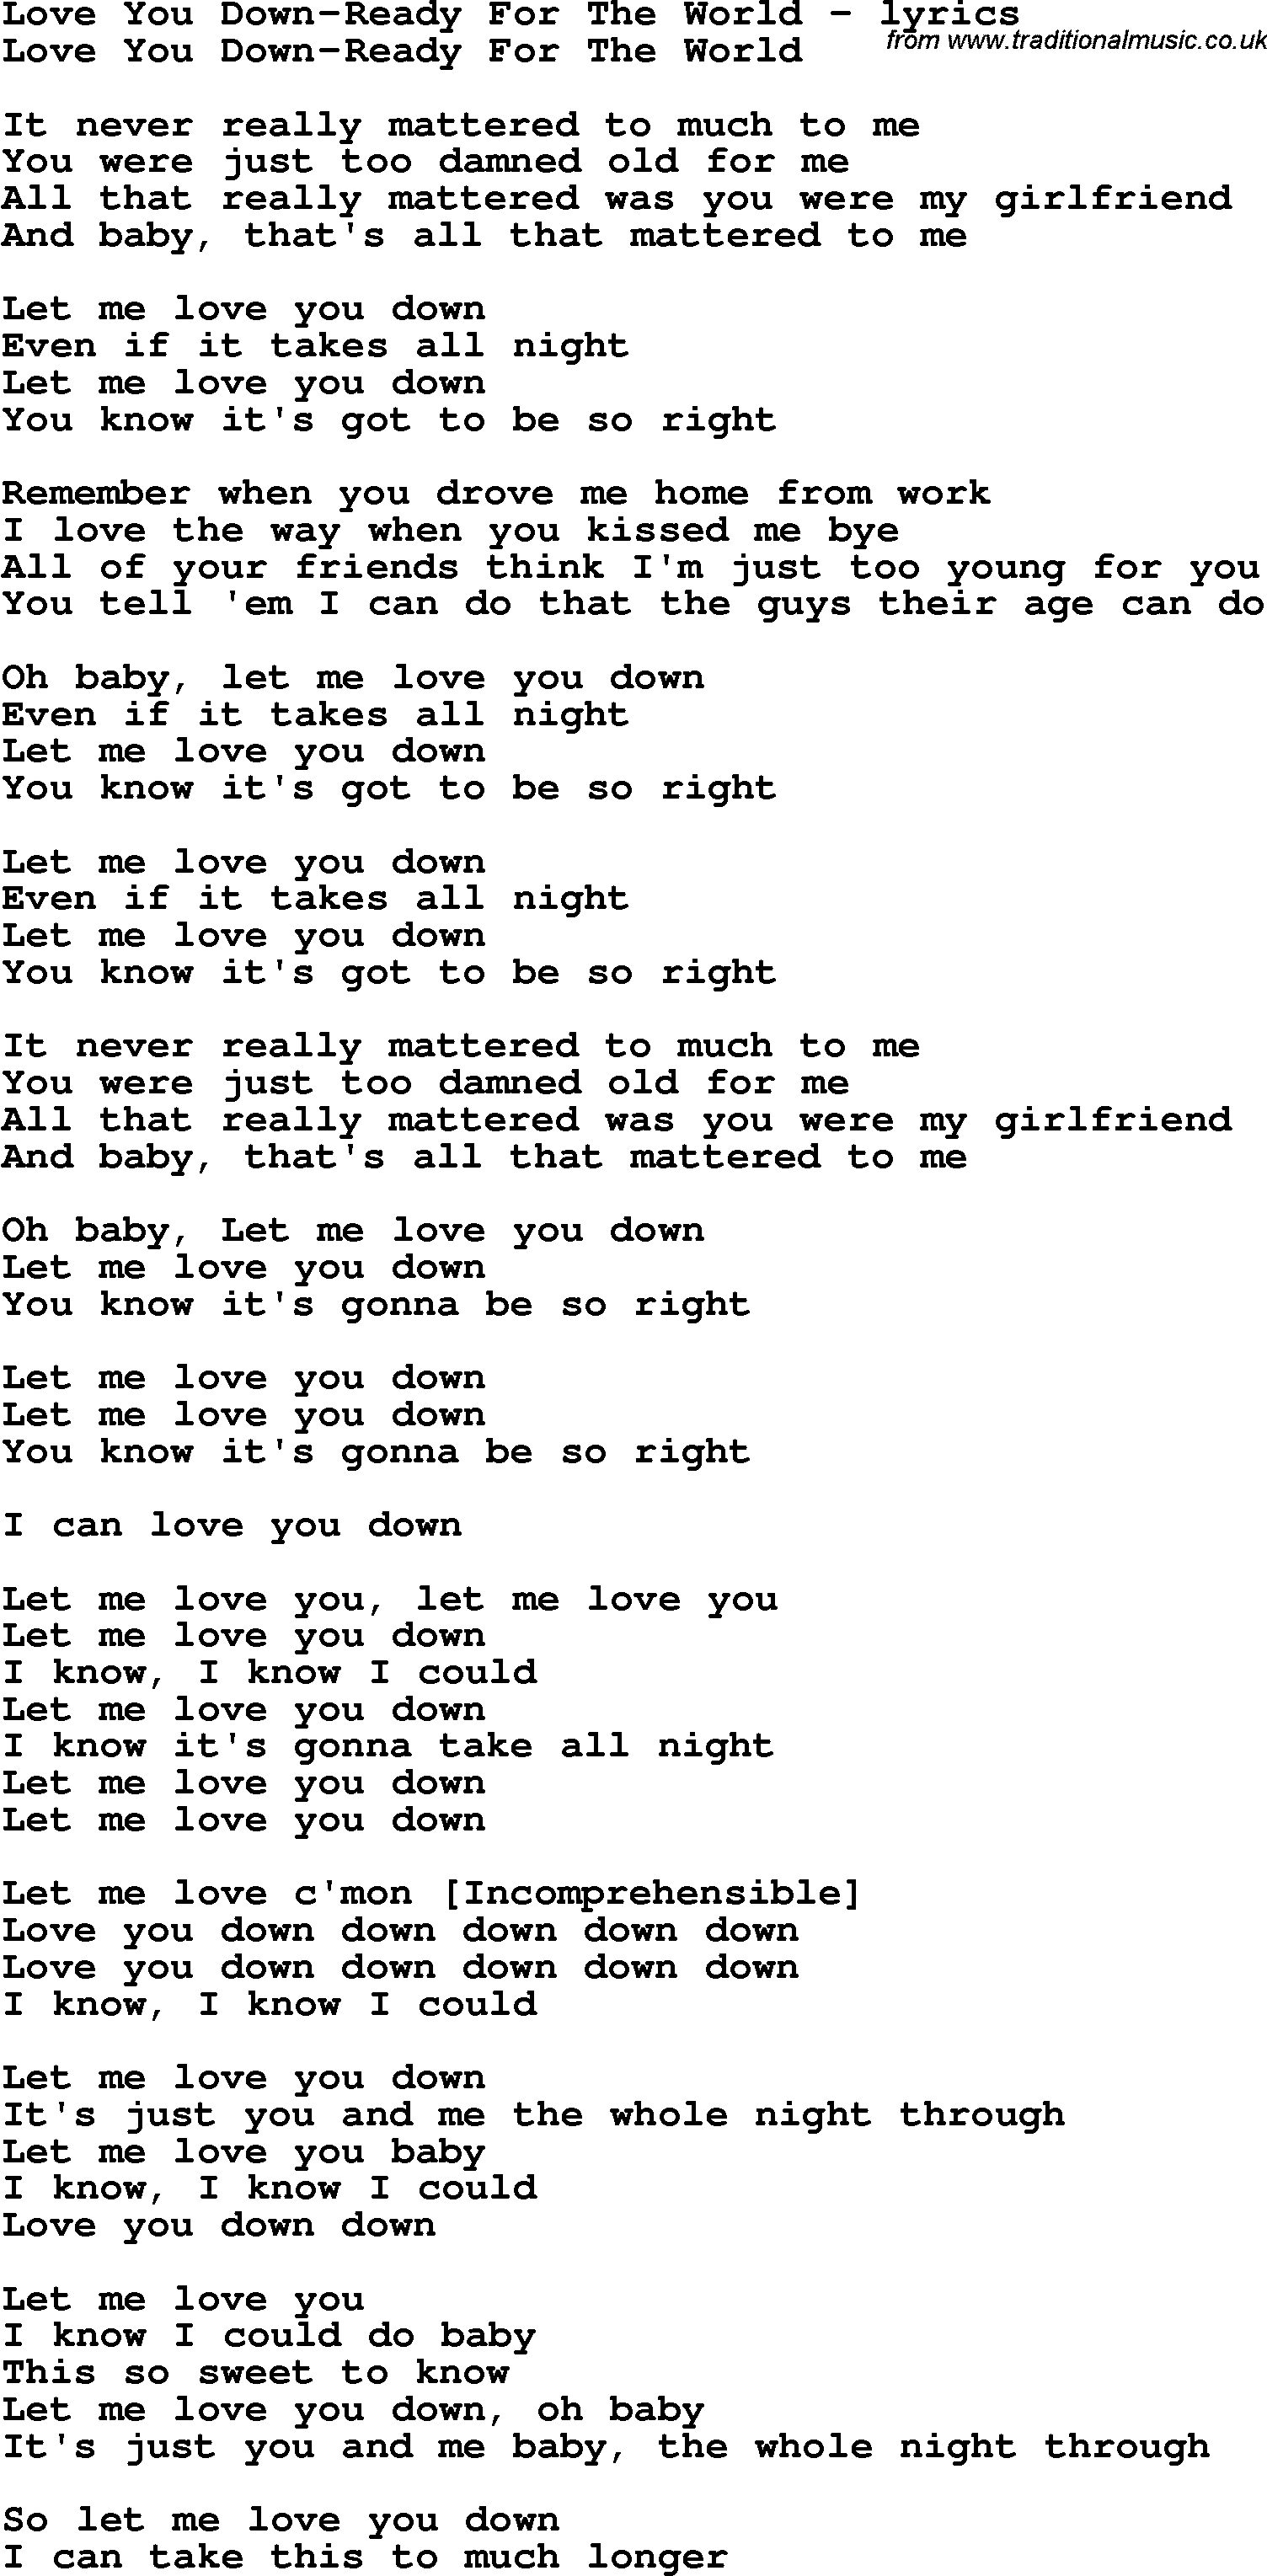 Love Song Lyrics For Love You Down Ready For The World